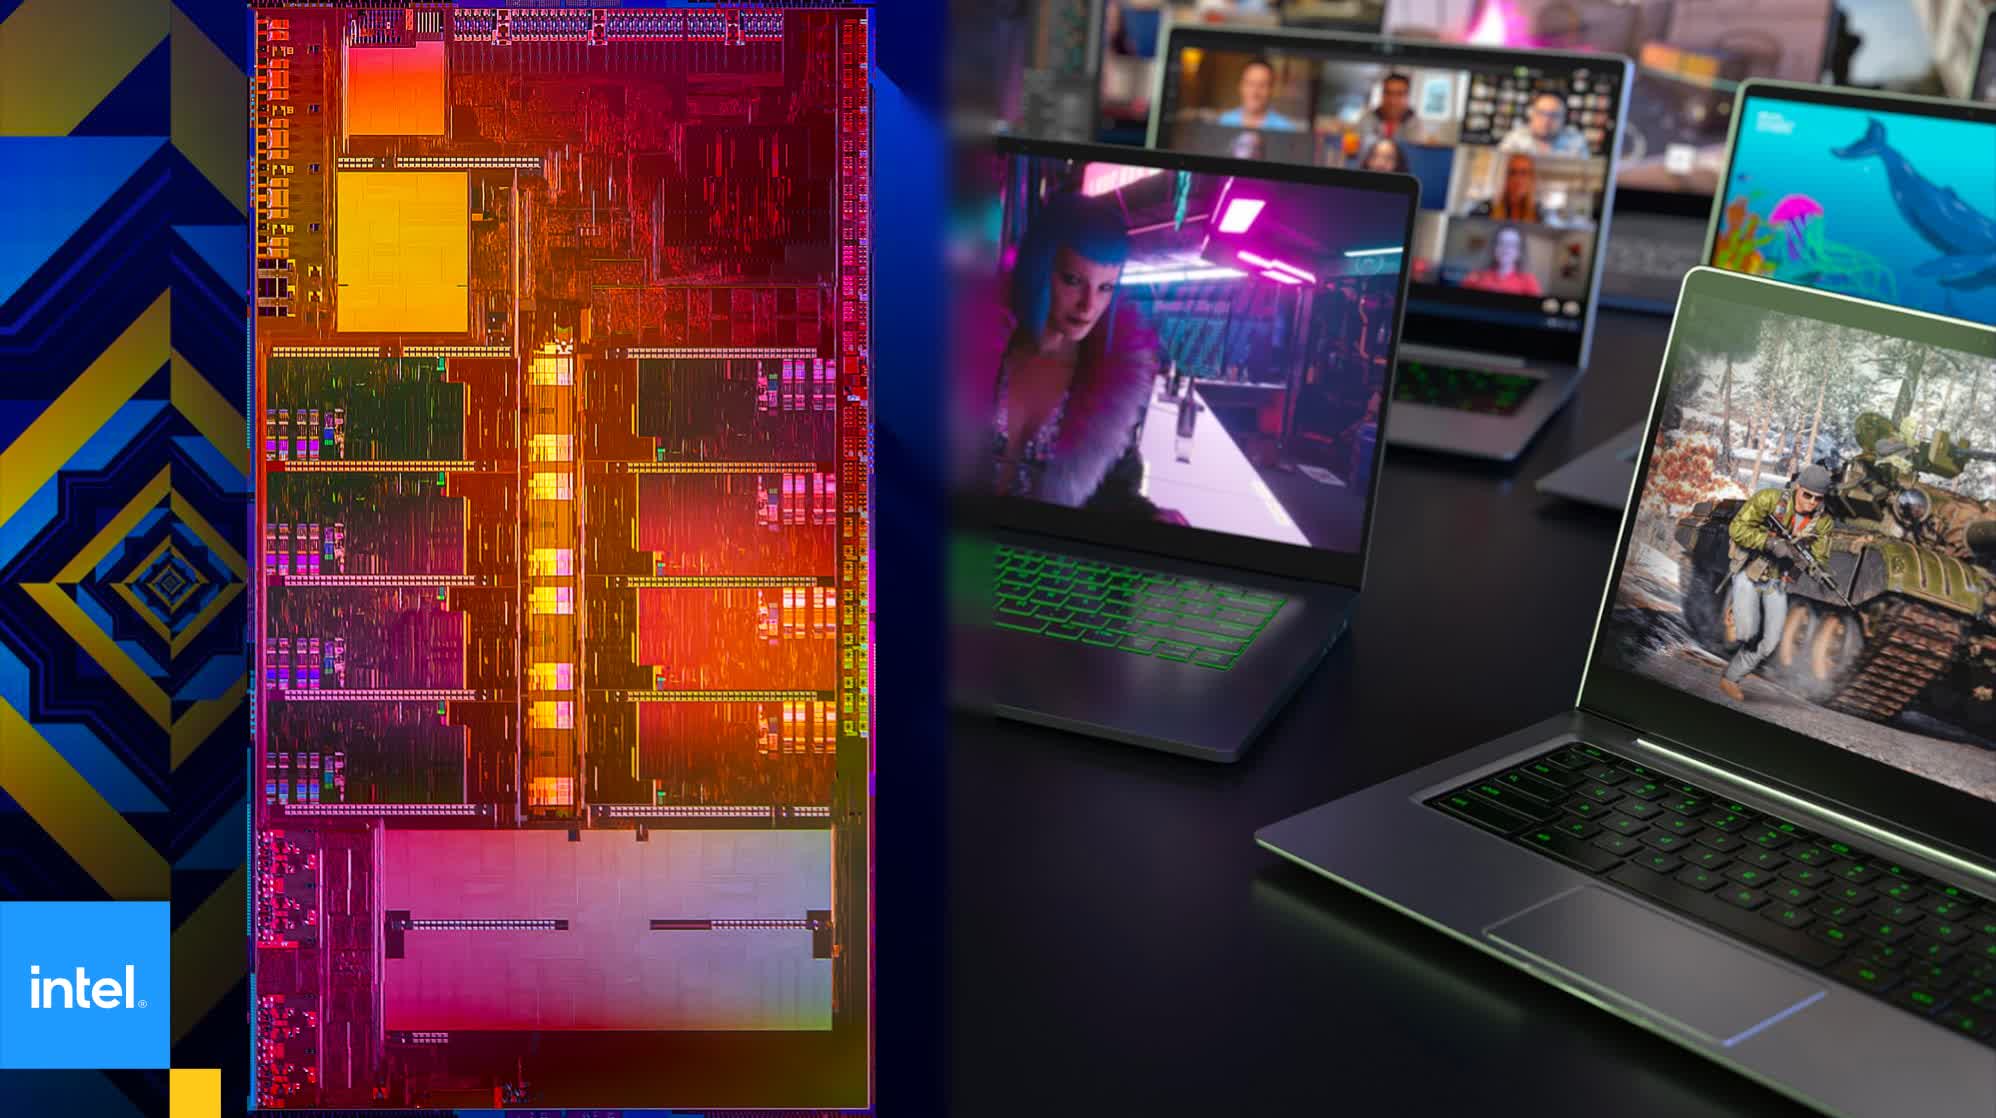 Intel and Nvidia launch 11th-gen Tiger Lake H45 CPUs and RTX 3050 GPUs for gaming and high-performance laptops